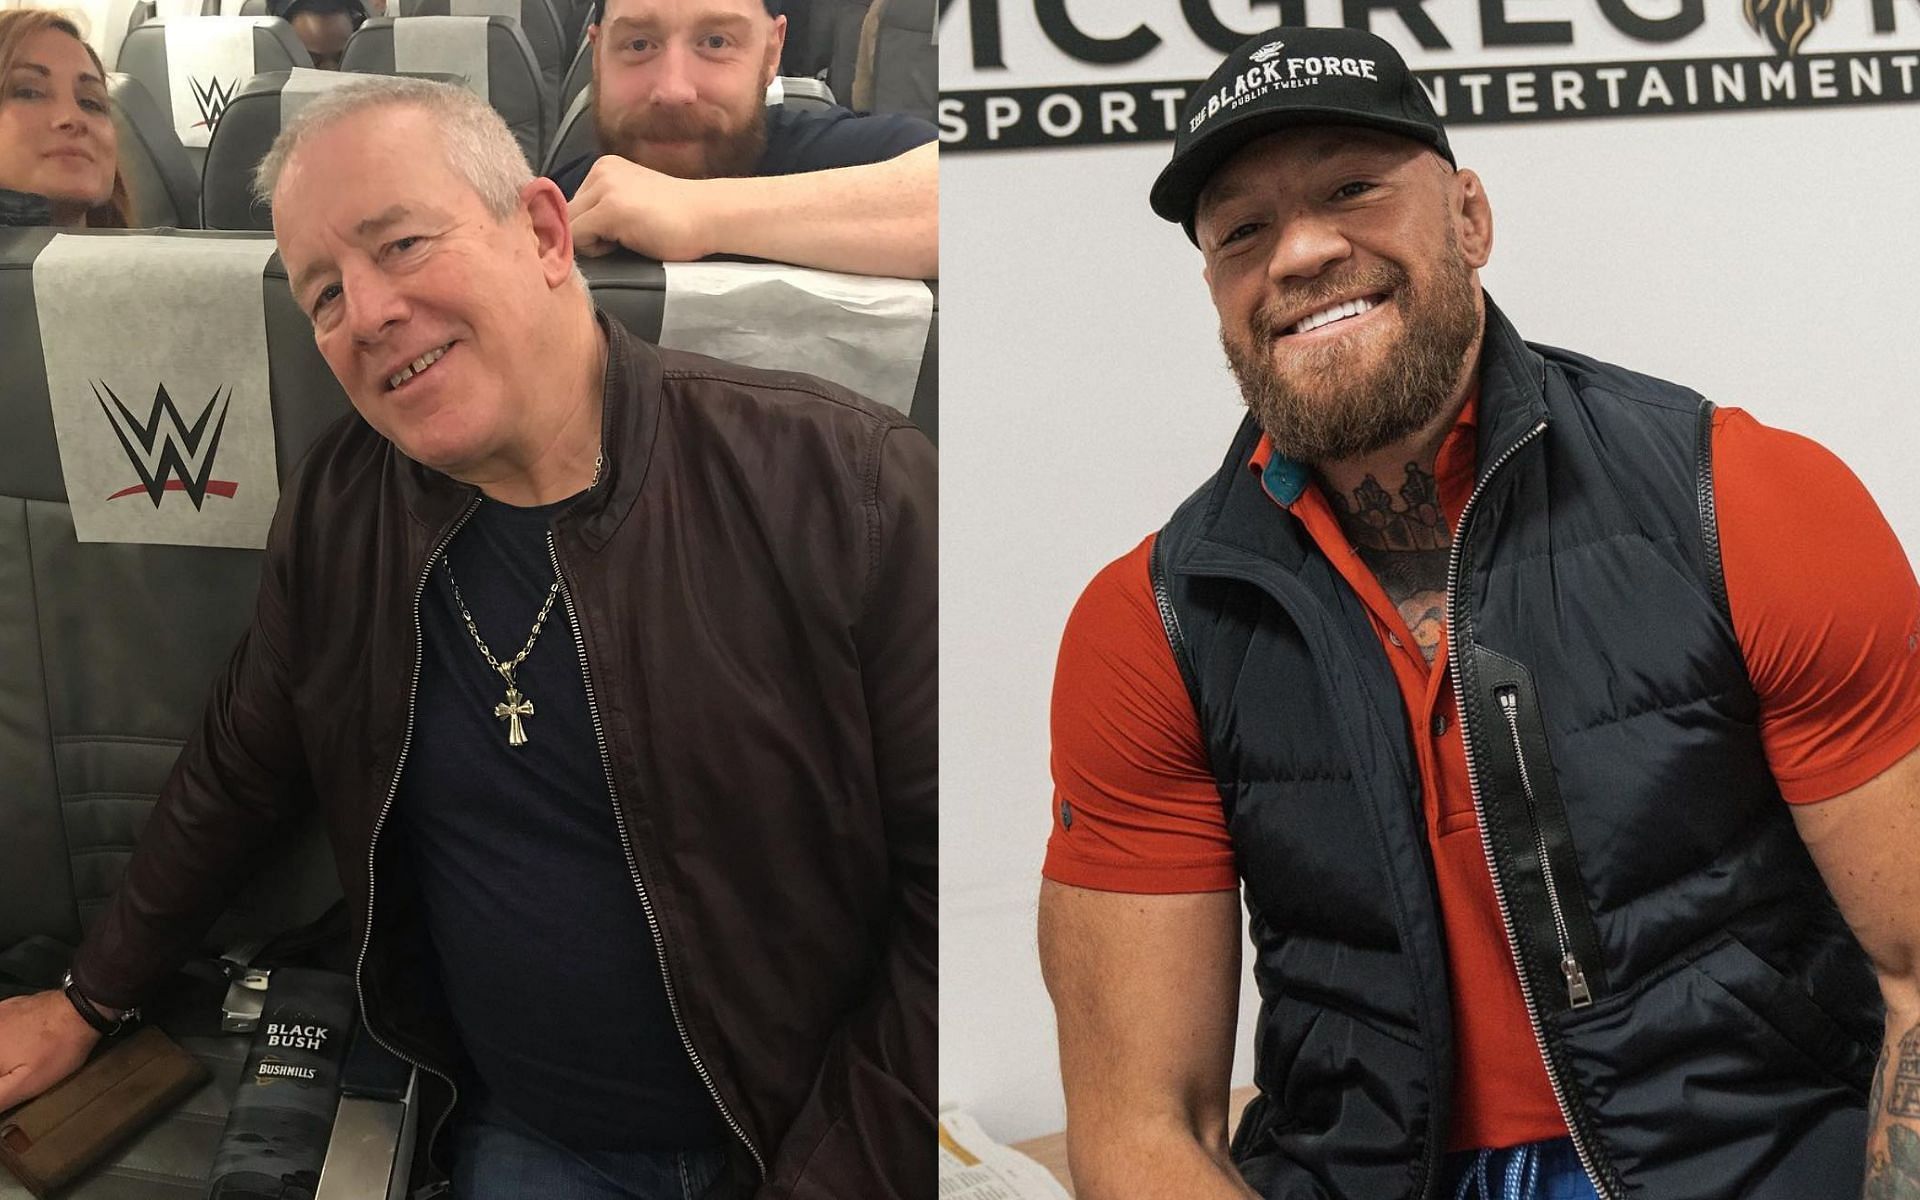 Fit Finlay (left) trolls Conor McGregor (right) over WrestleMania claims [Image Courtesy: @ringfox1 and @thenotoriousmma on Instagram]